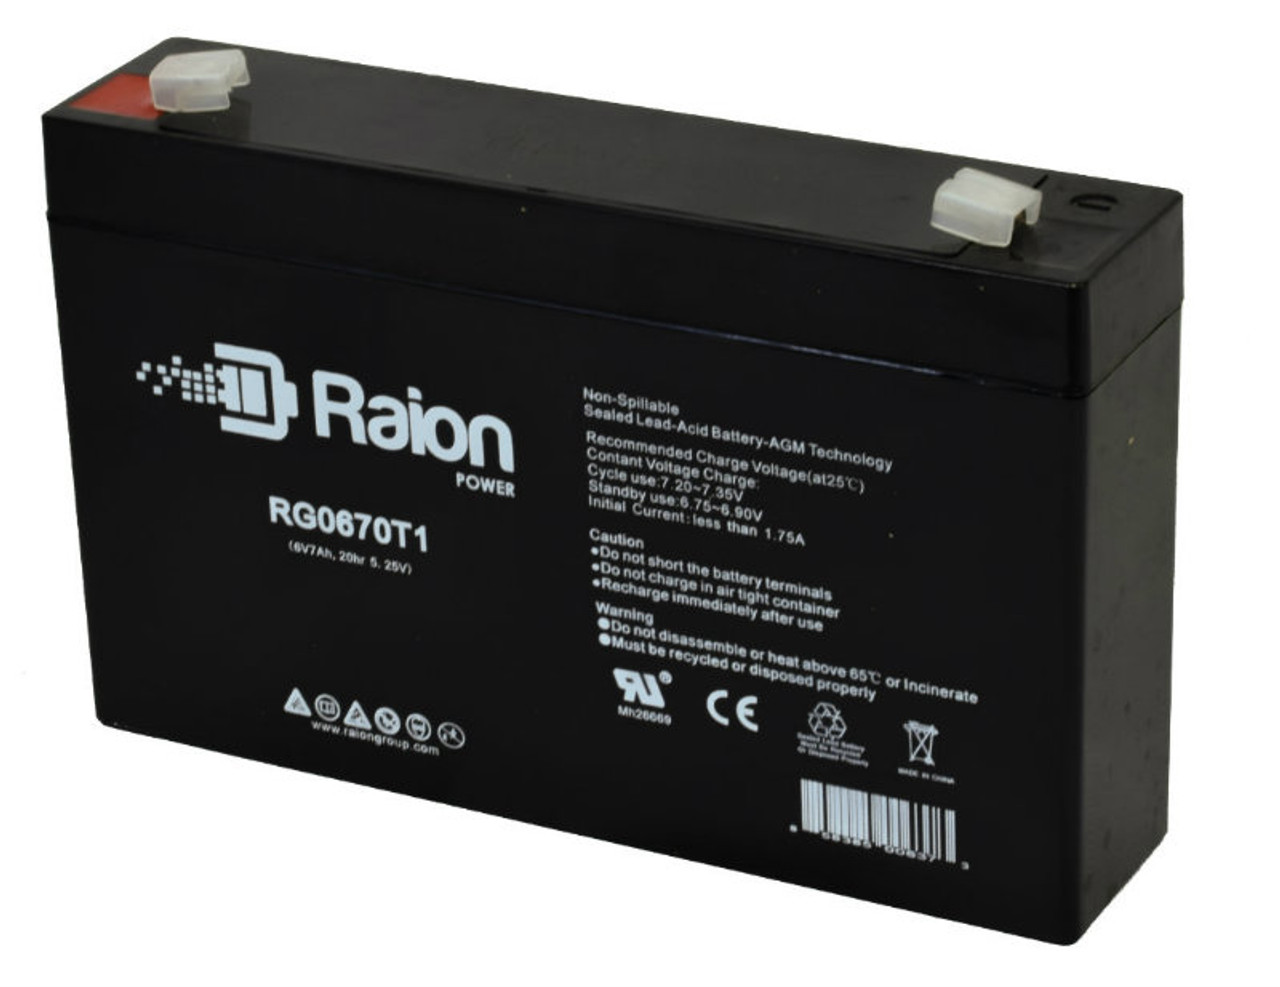 Raion Power RG0670T1 Replacement Battery for MHB MS7-6 OEM Battery